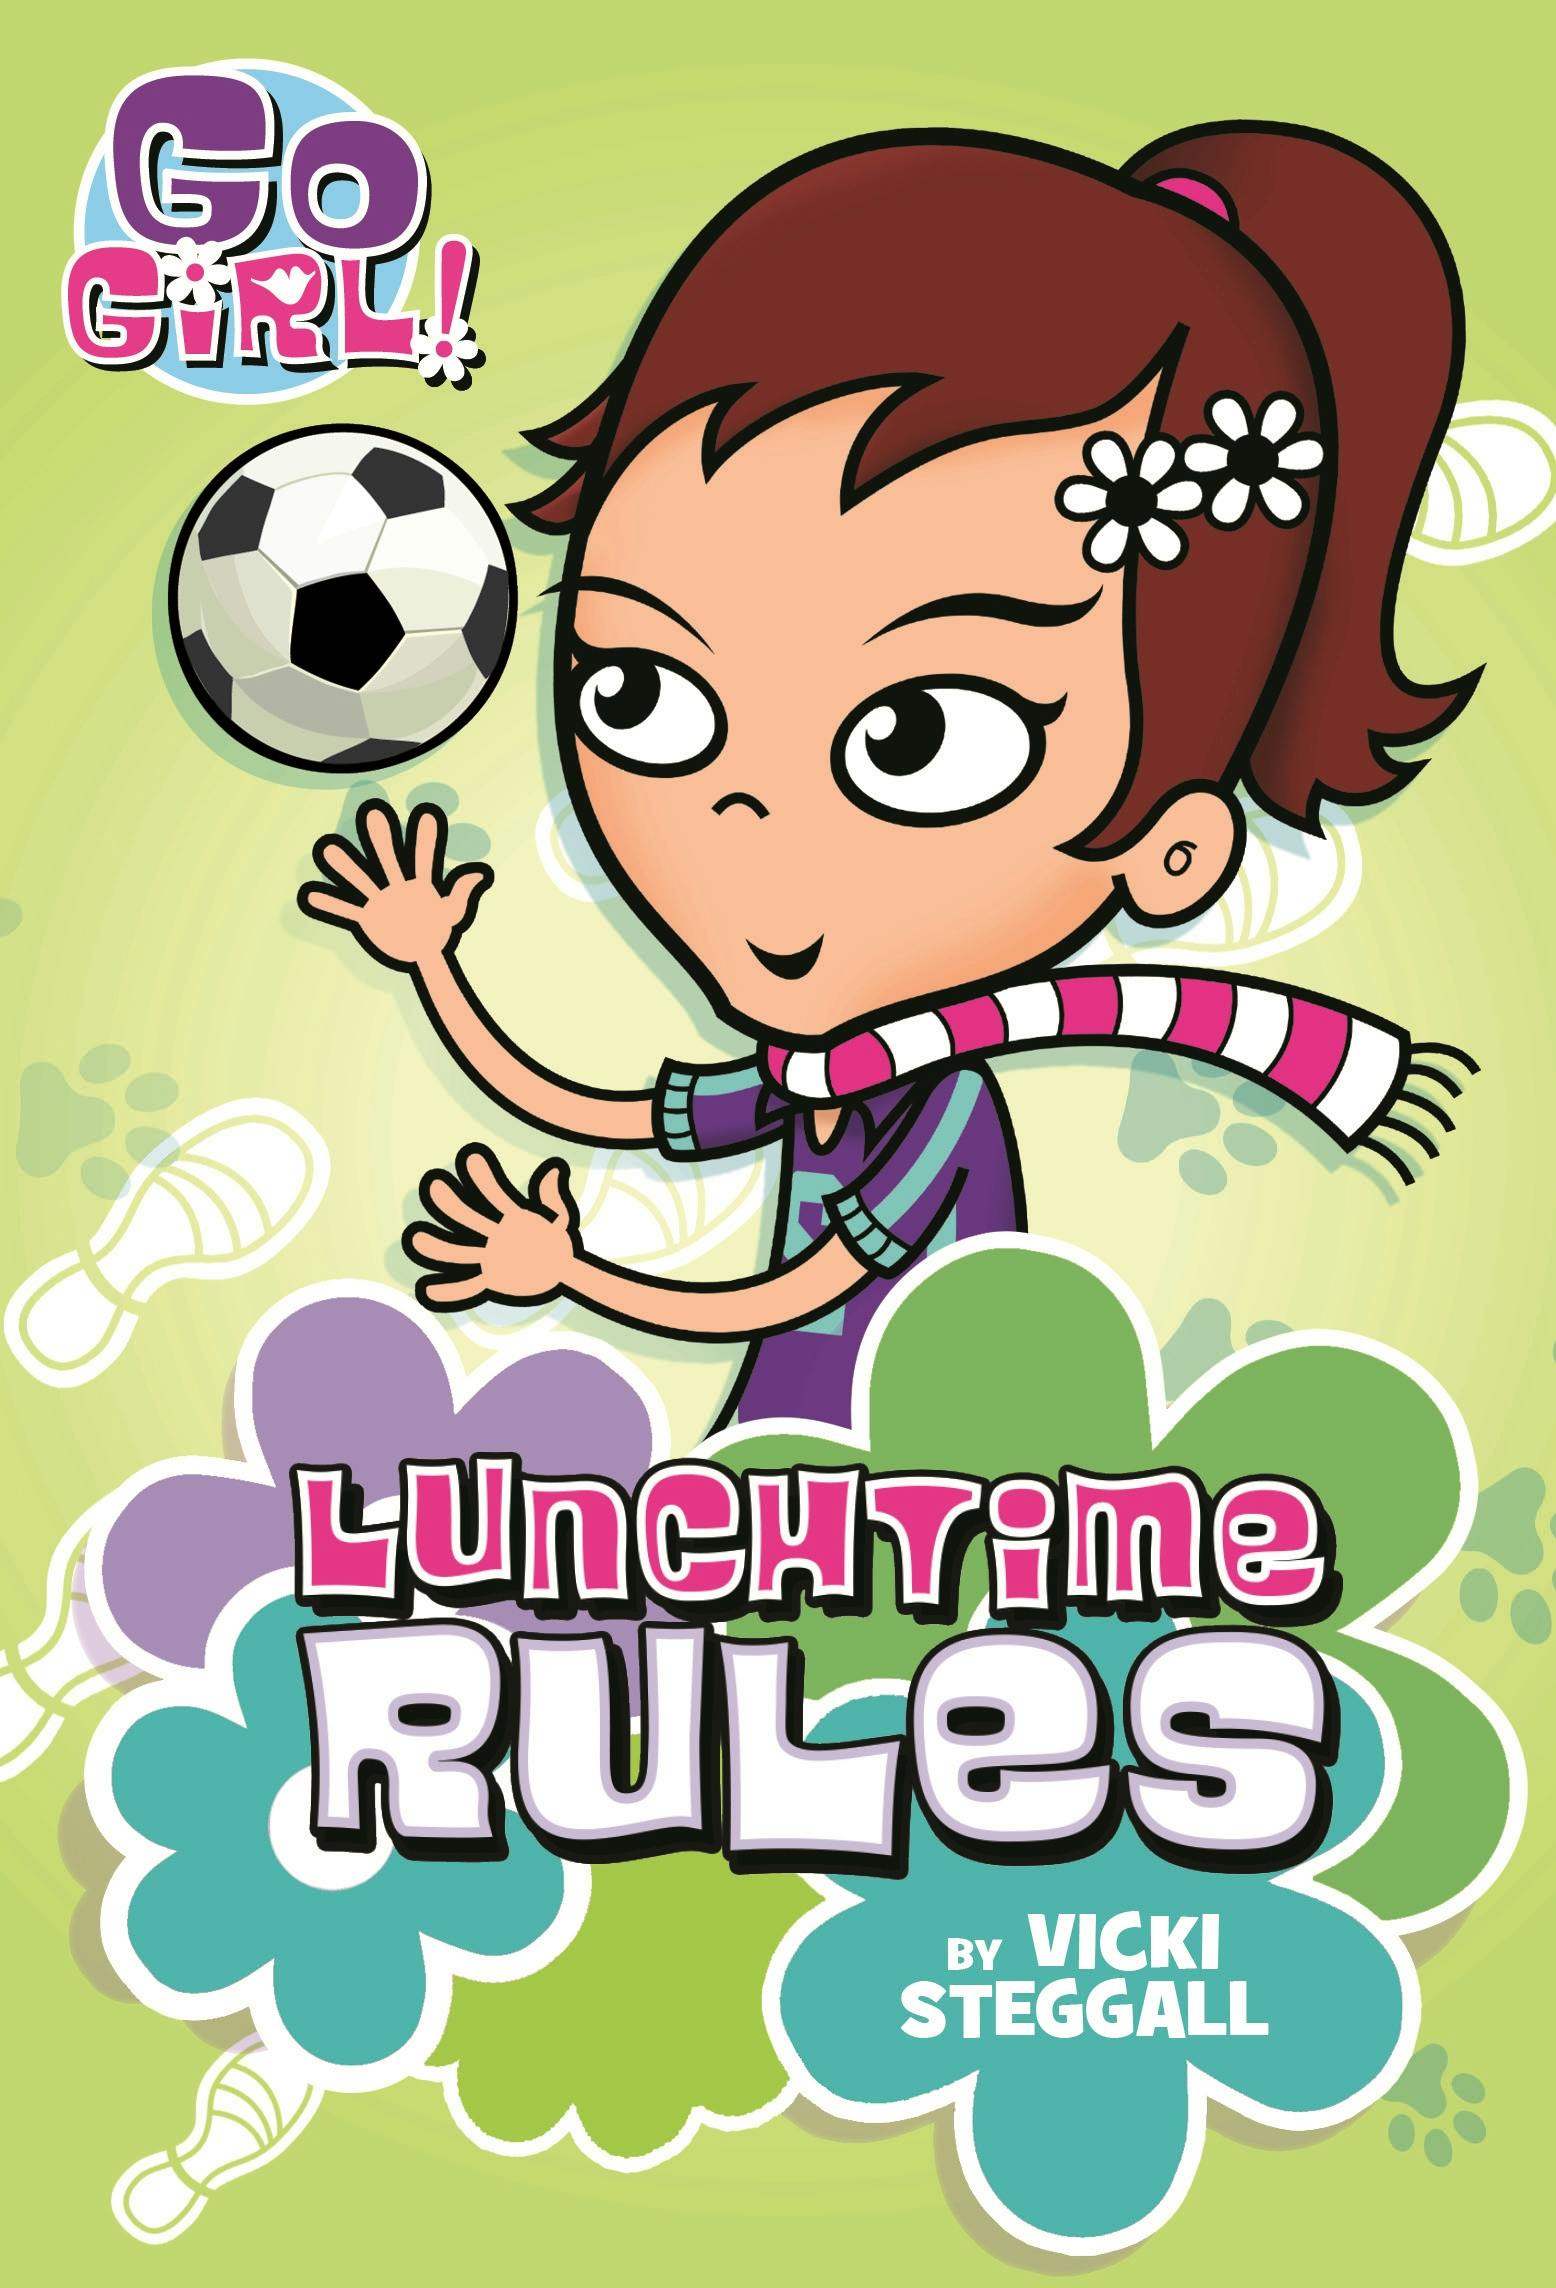 Go Girl! #6: Lunchtime Rules